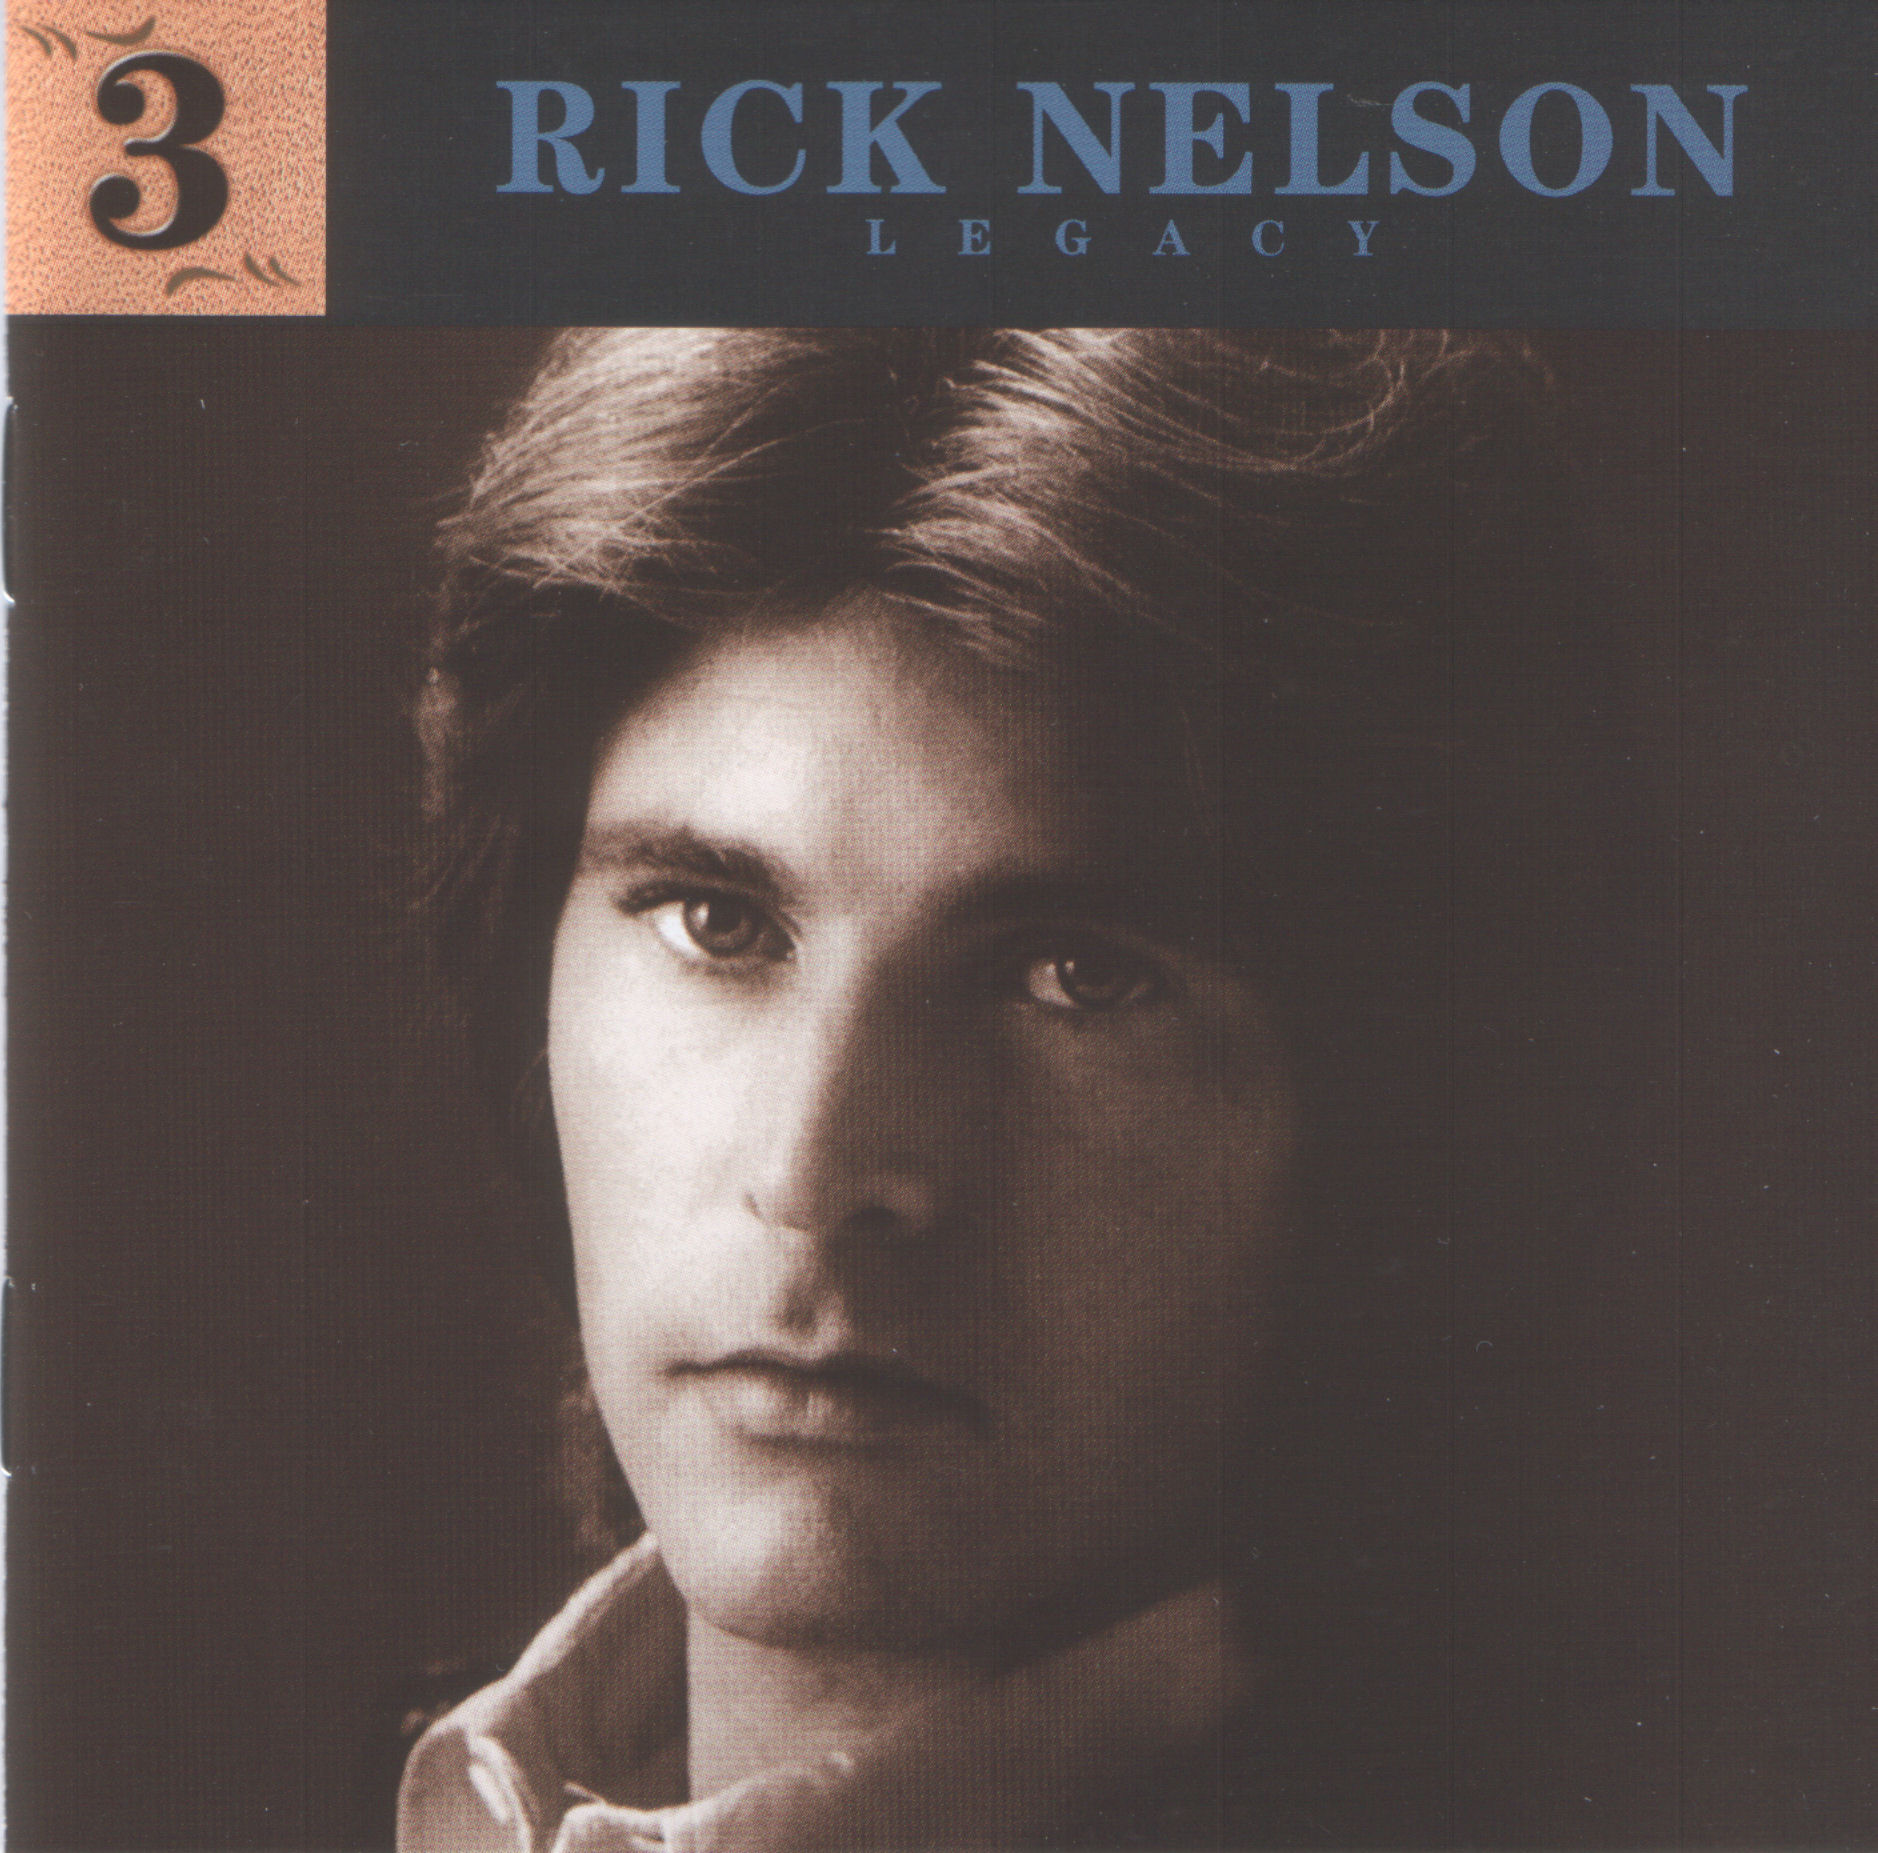 Rick Nelson Legacy 3 front.